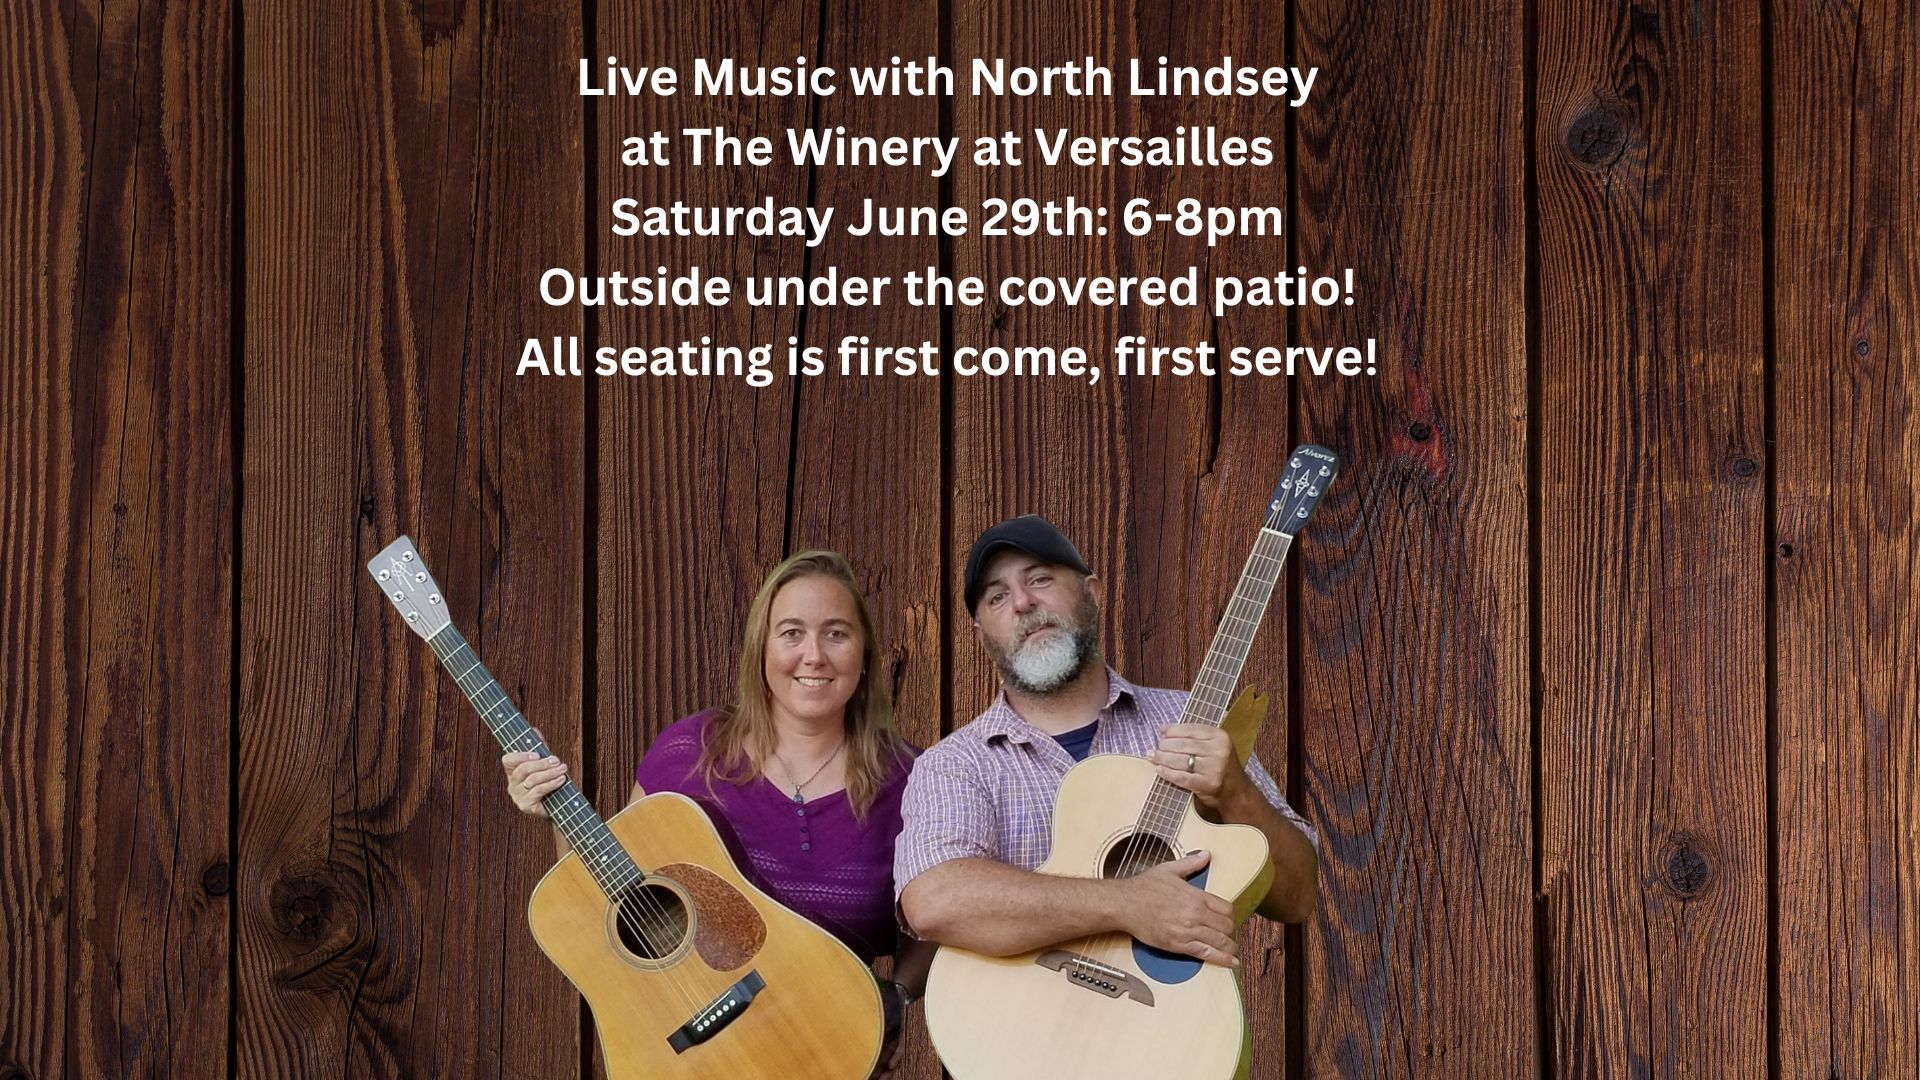 Live Music with North Lindsey!